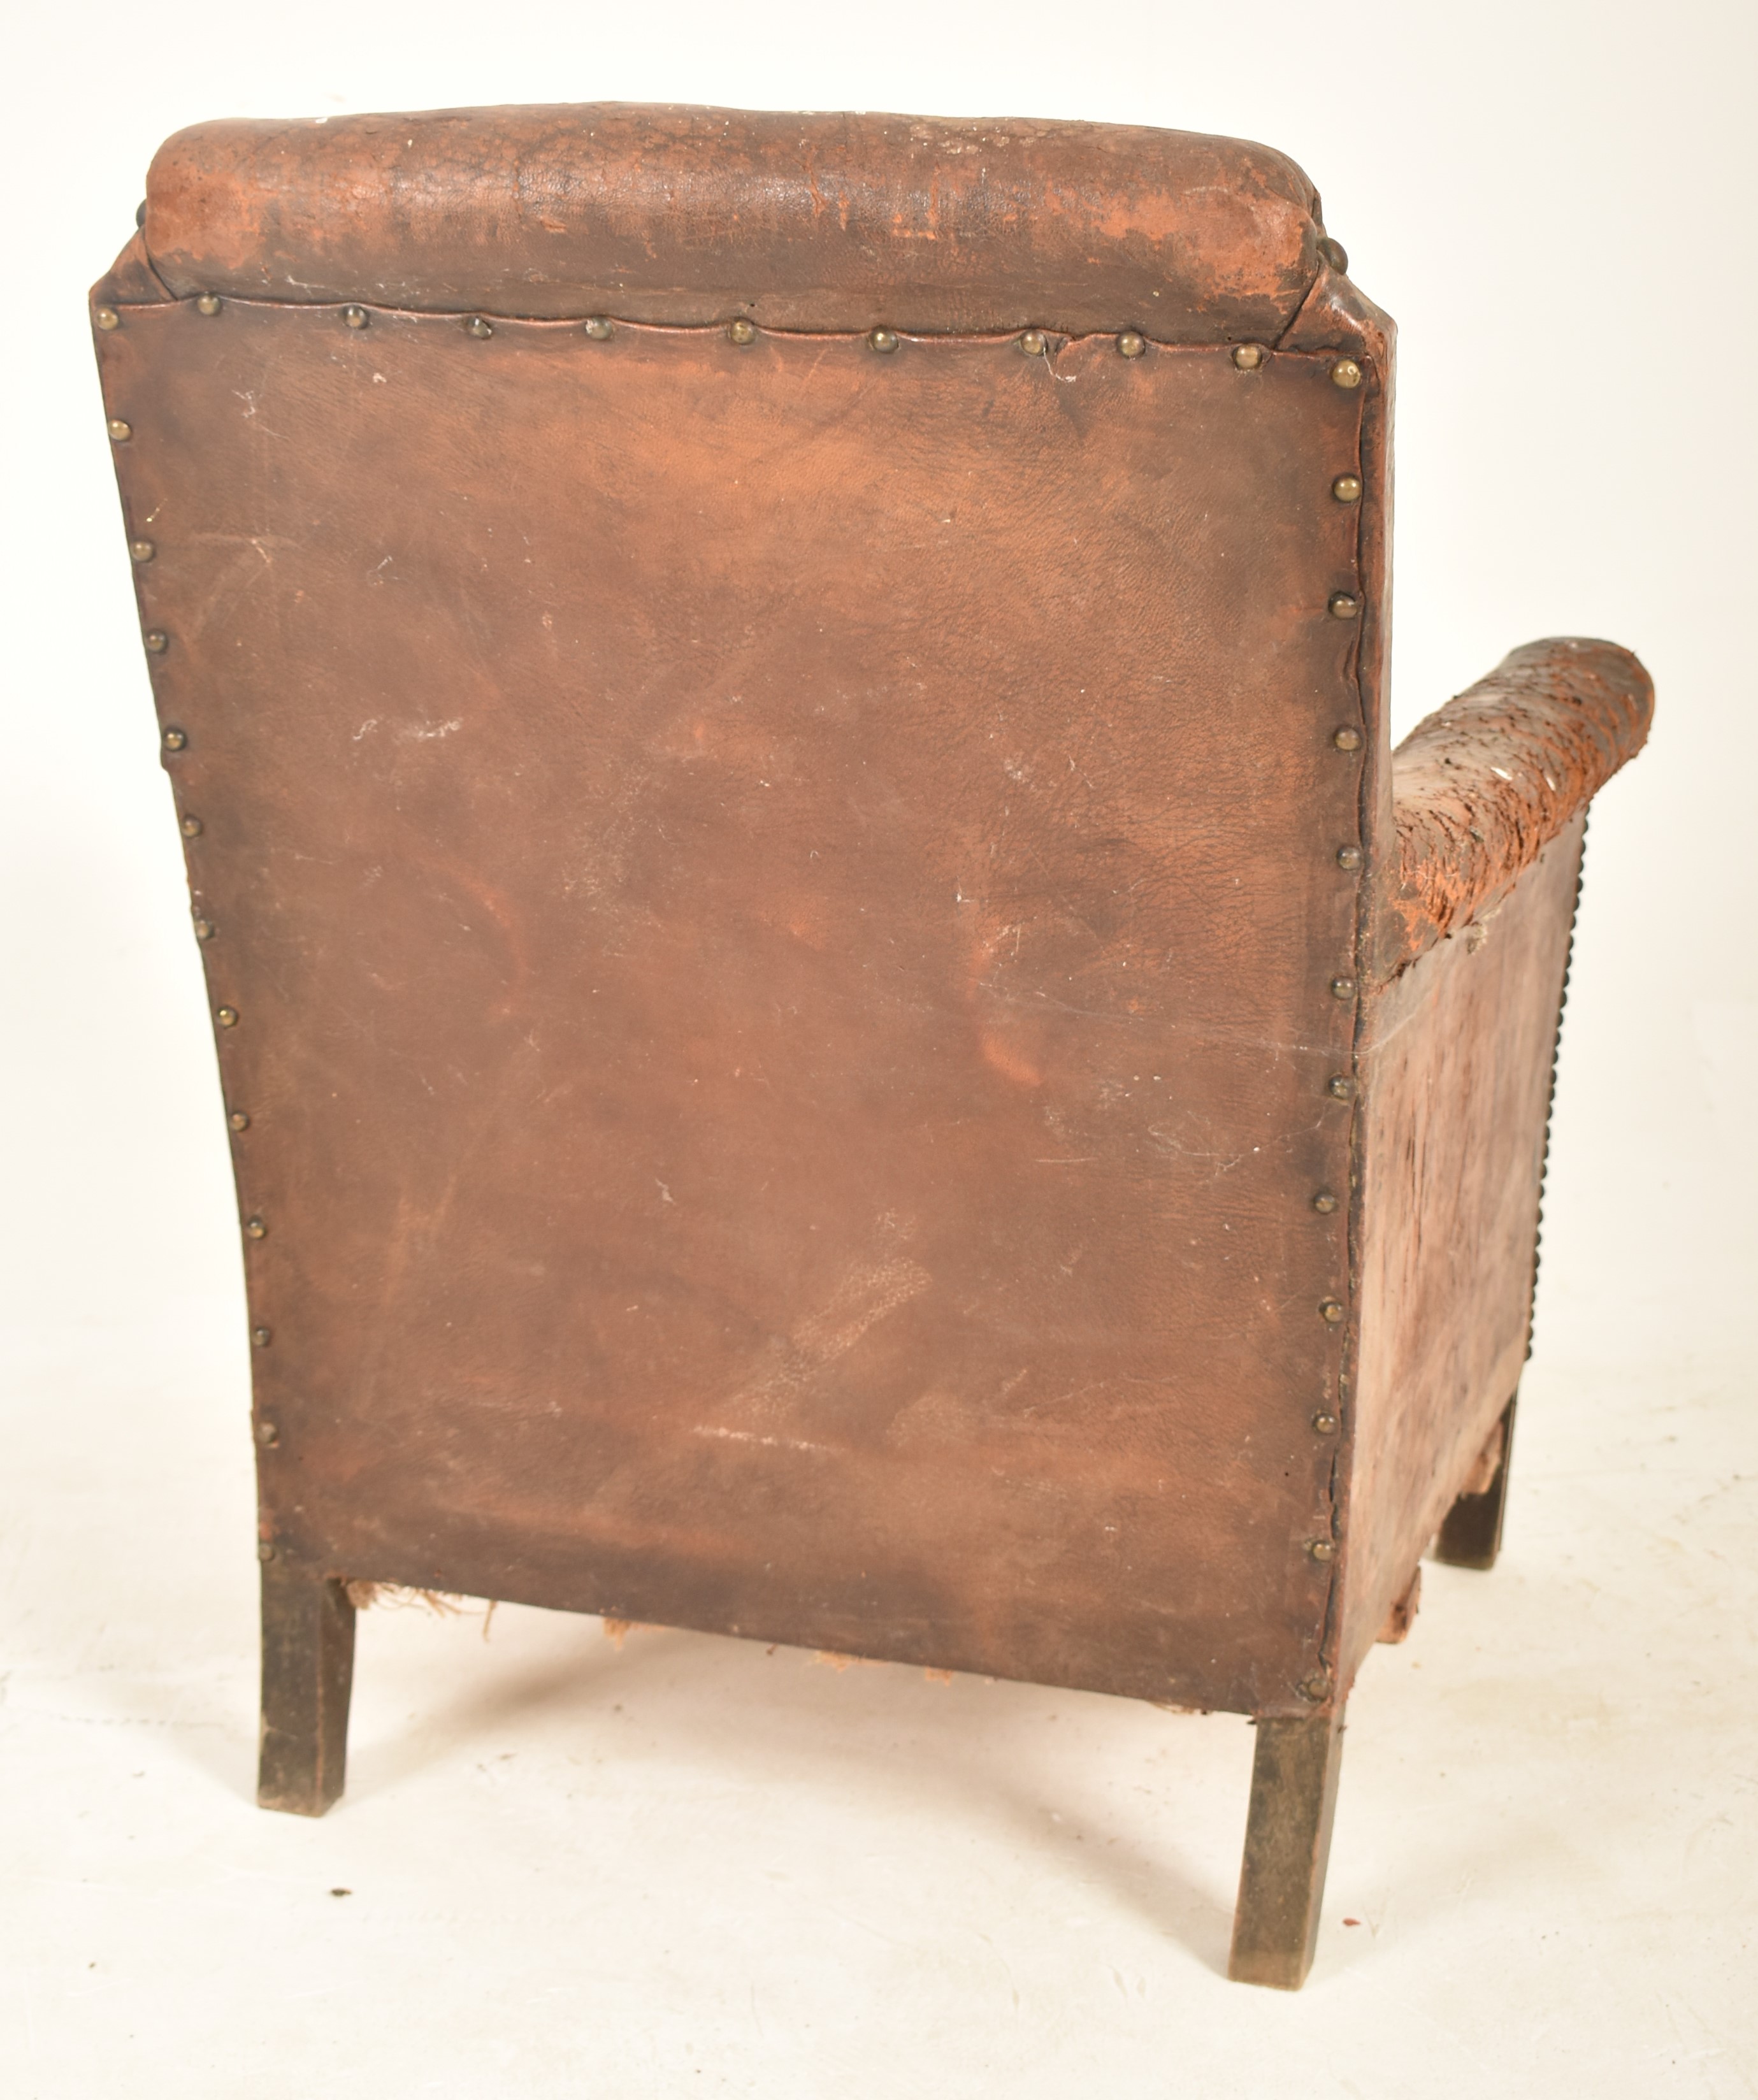 1920S BROWN LEATHER GENTLEMEN CLUB STUDDED ARMCHAIR - Image 6 of 6